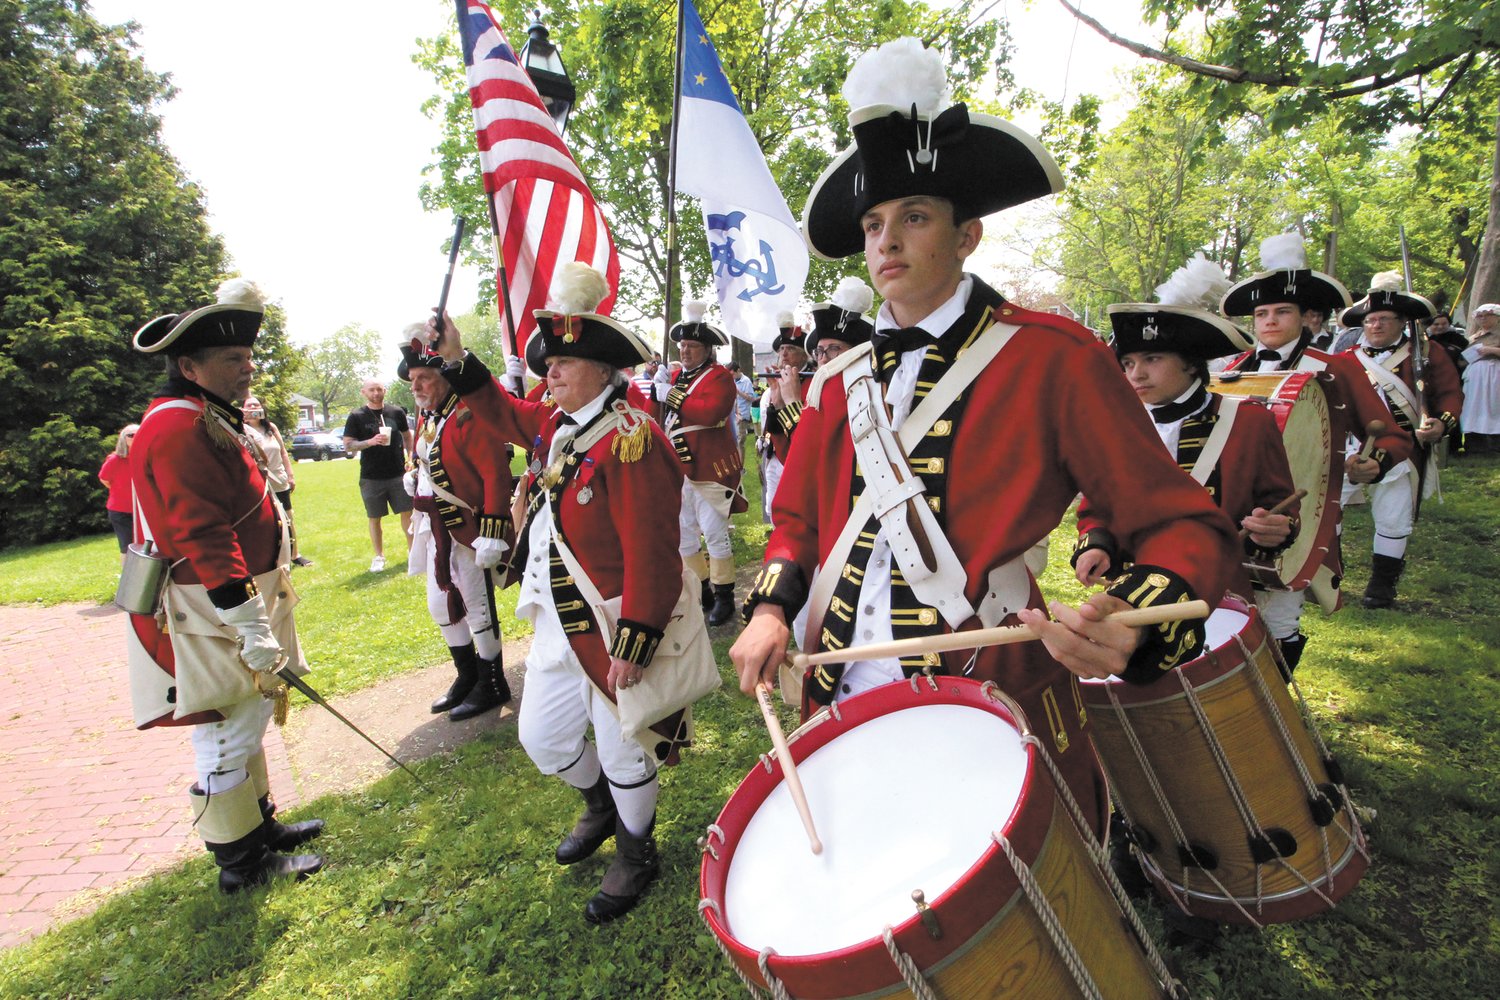 CALLING THE ASSEMBLY TO ORDER:  The Pawtuxet Rangers marched to the park signaling the noon start to Gaspee Days festivities.